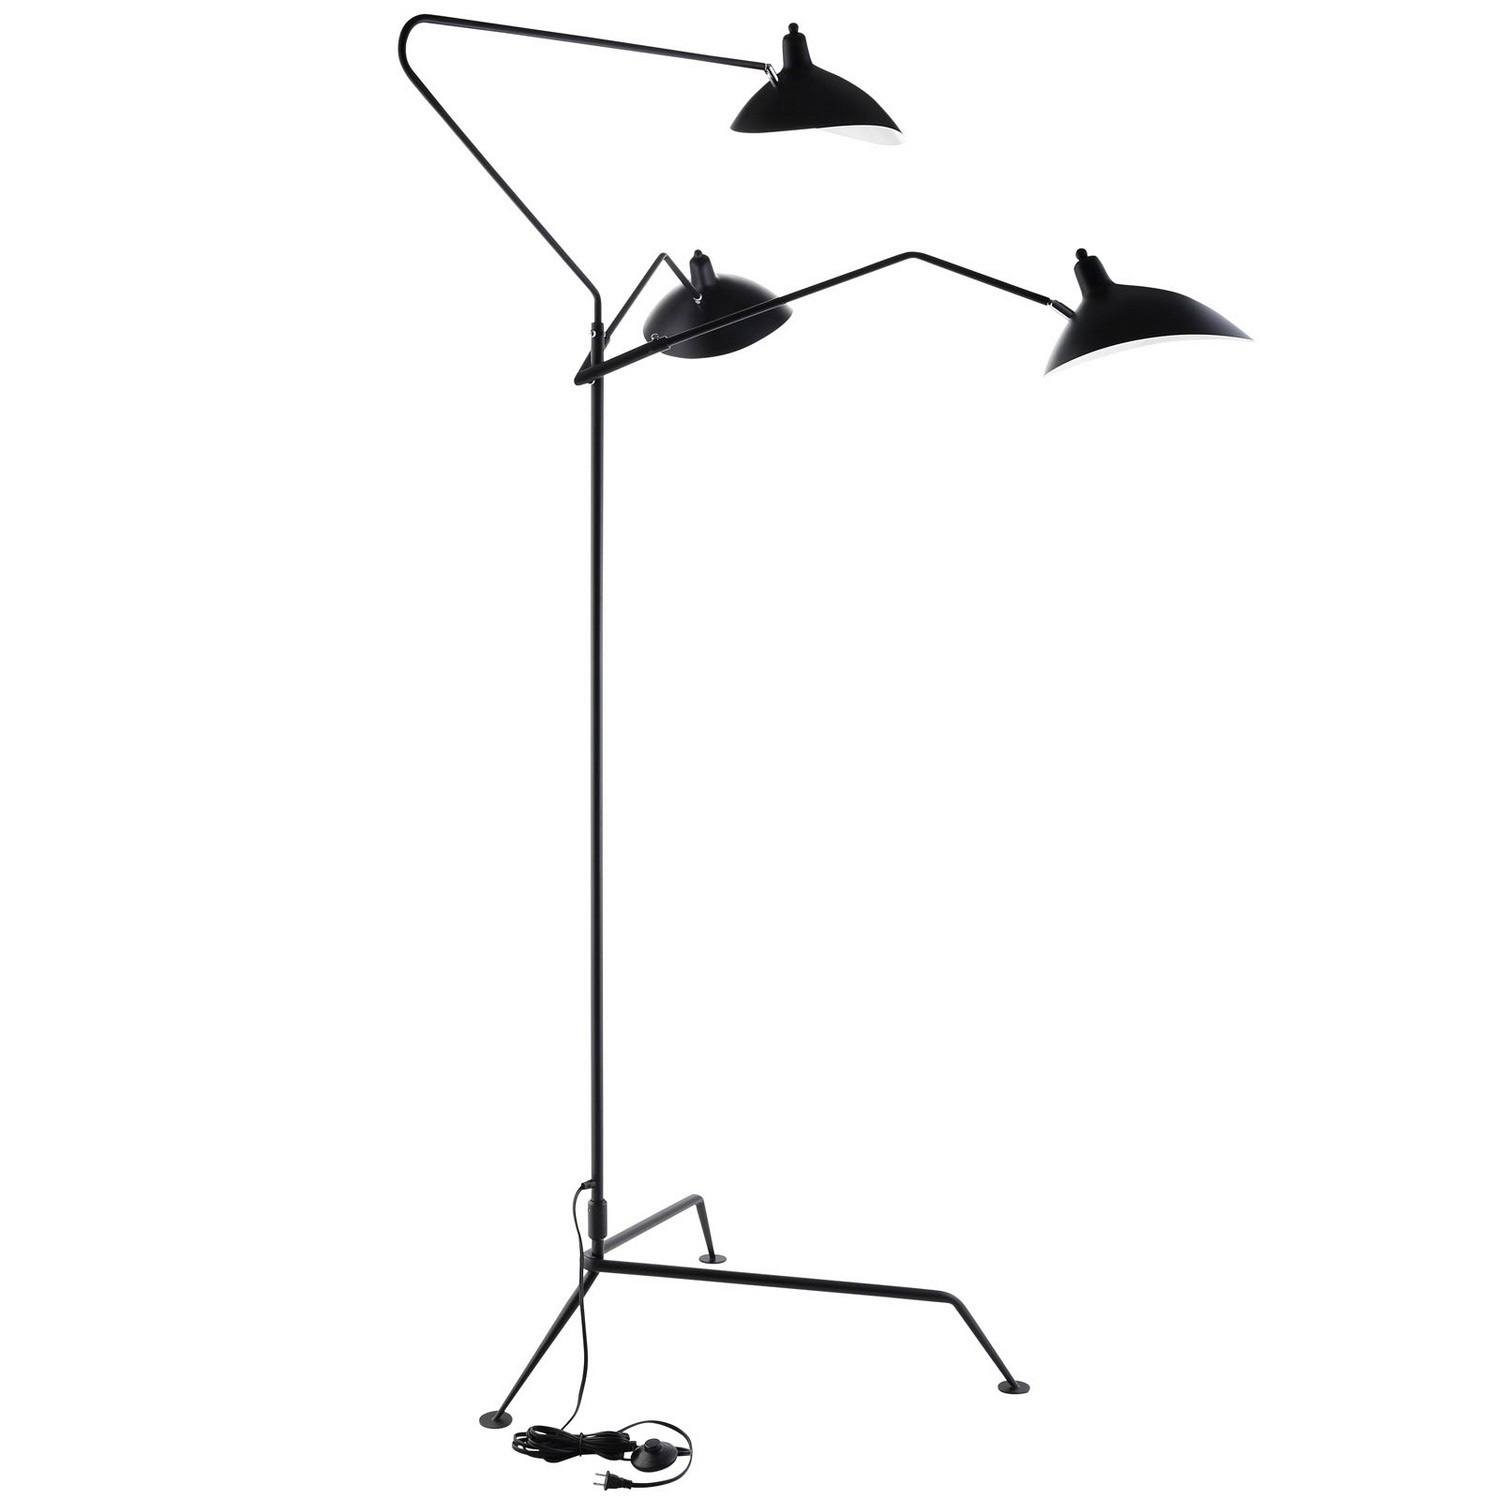 Modway View Stainless Steel Floor Lamp - Black